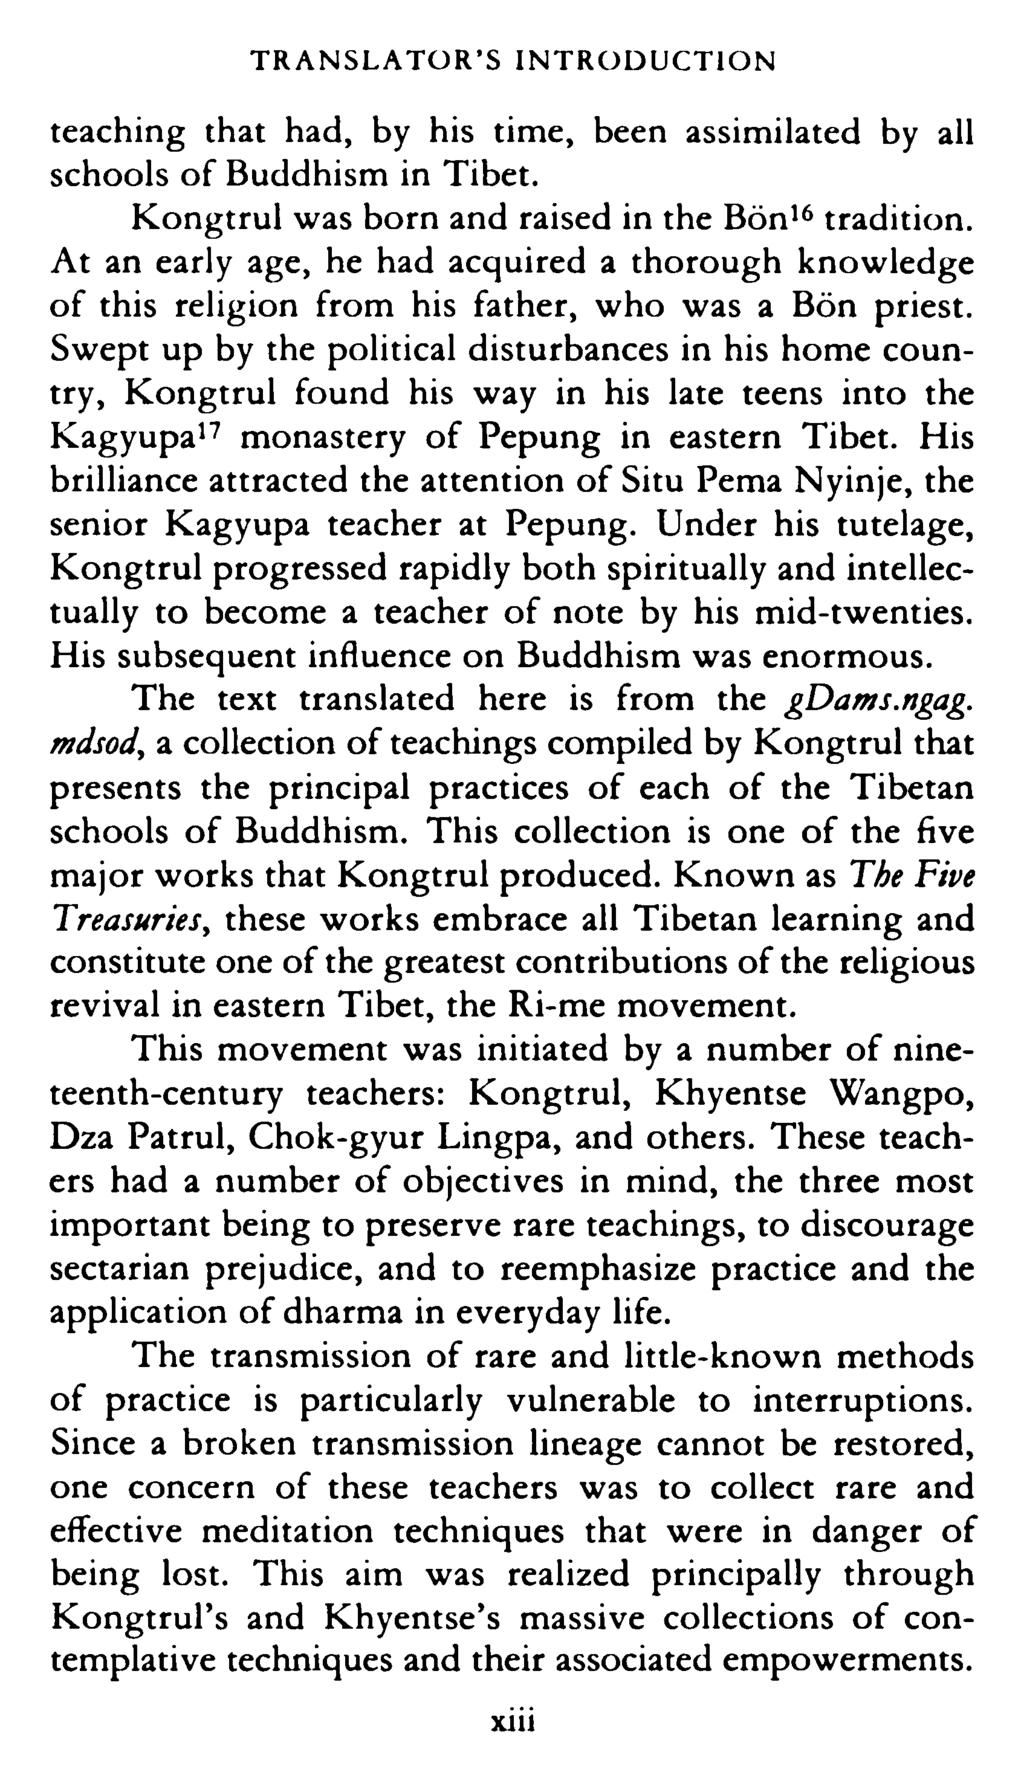 TRANSLATOR'S INTRODUCTION teaching that had, by his time, been assimilated by all schools of Buddhism in Tibet. Kongtrul was born and raised in the Bont6 tradition.